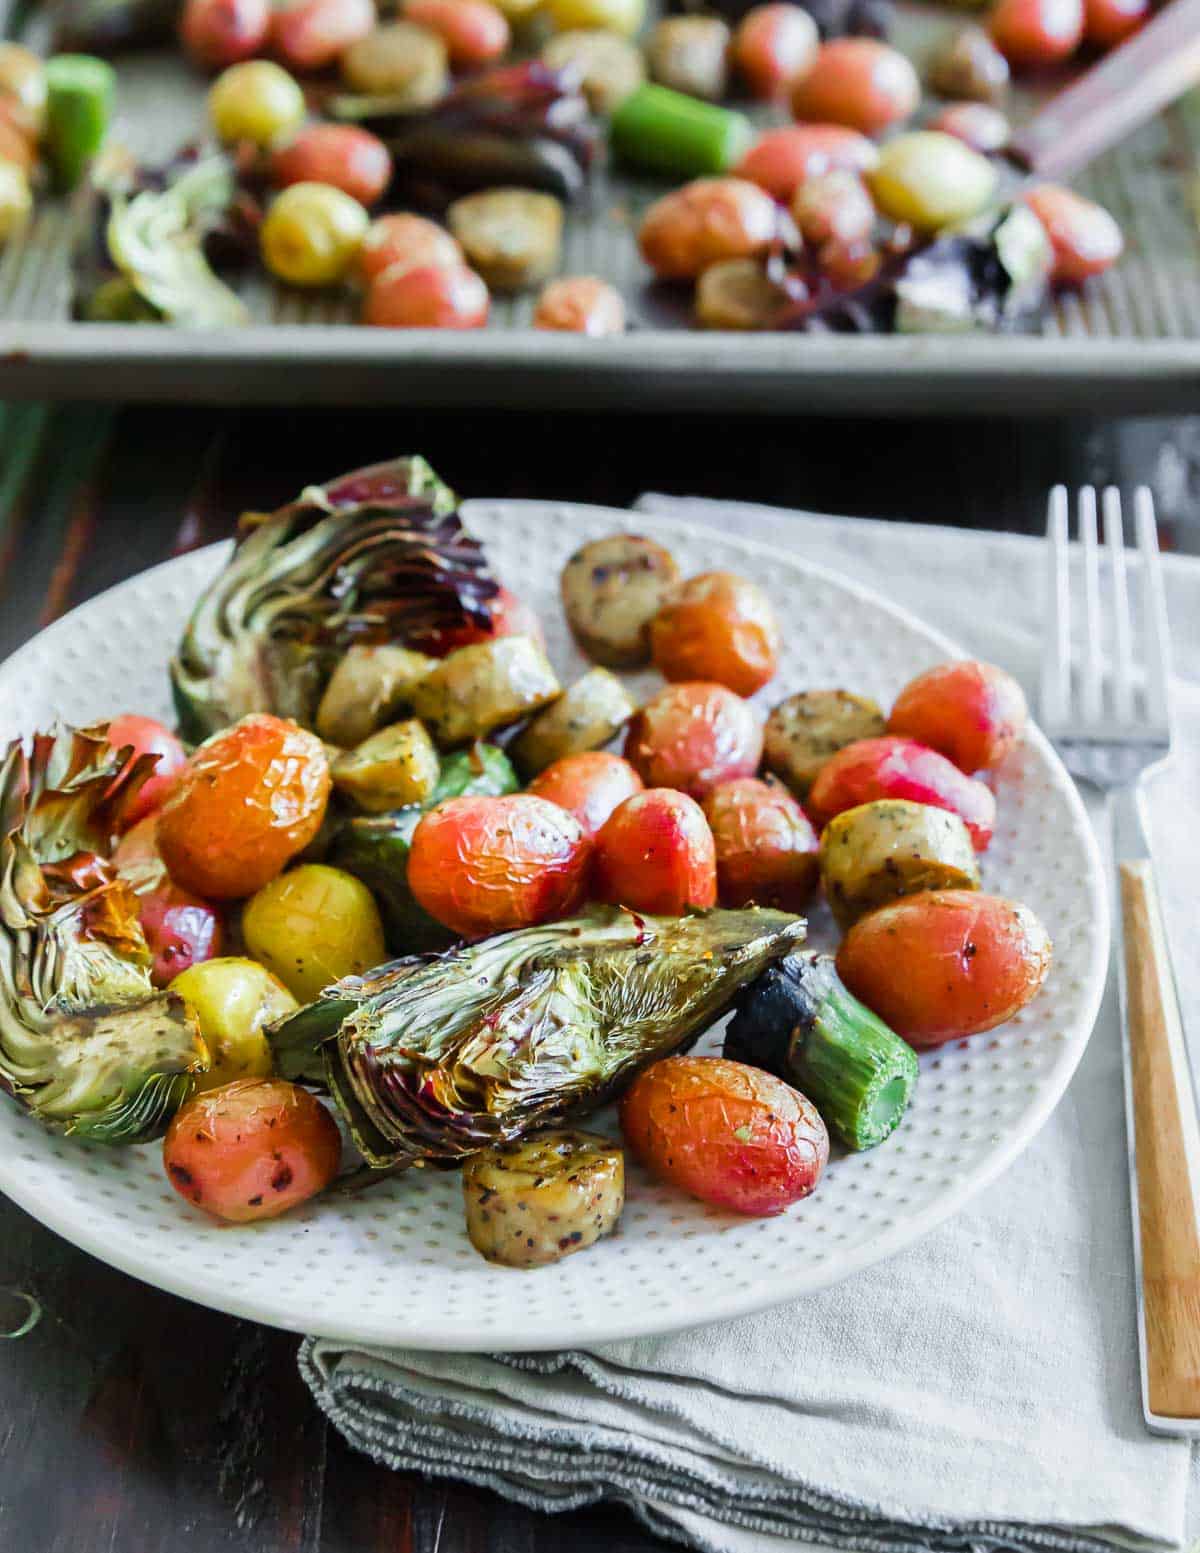 Roasted vegetables, artichokes and sausage on a plate with a fork.